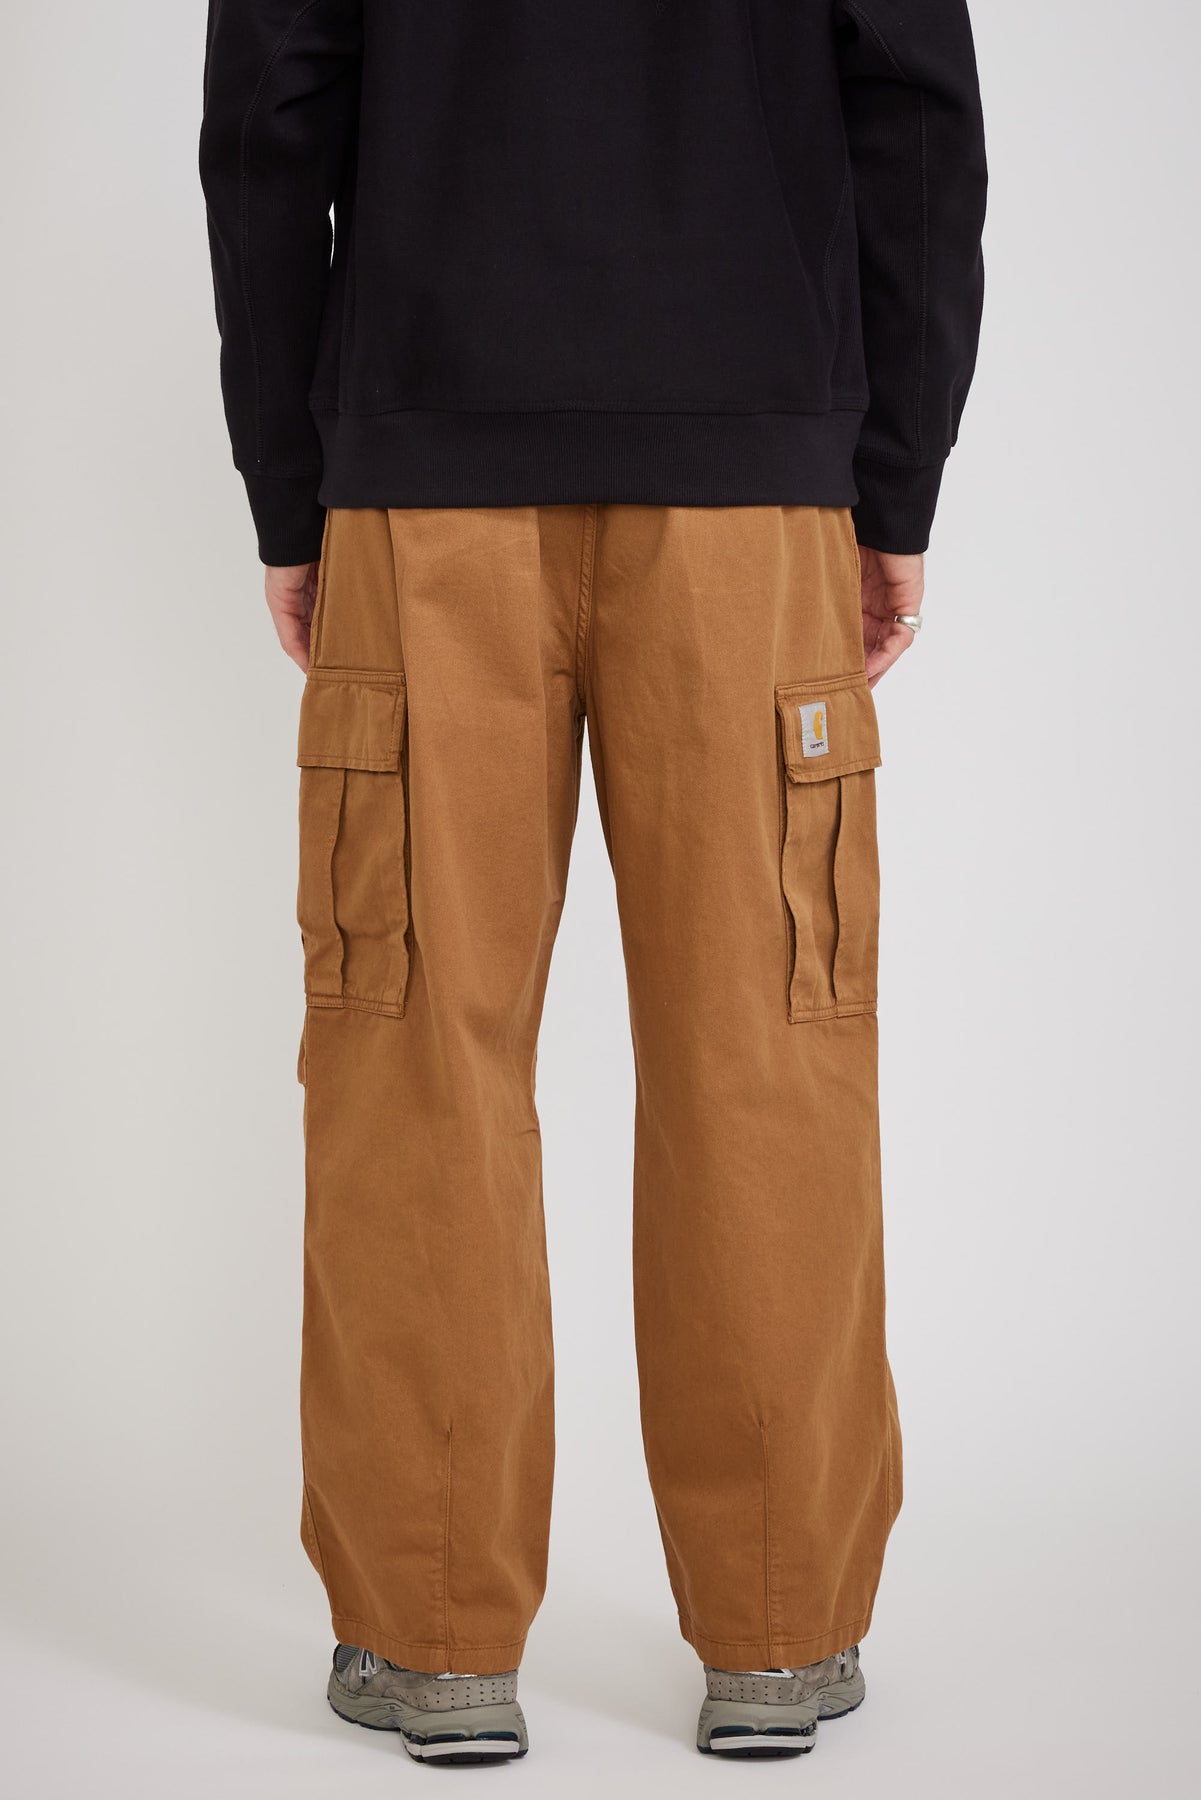 STEEL RUGGED FLEX RELAXED FIT DOUBLEFRONT CARGO MULTIPOCKET WORK PANT   Carhartt